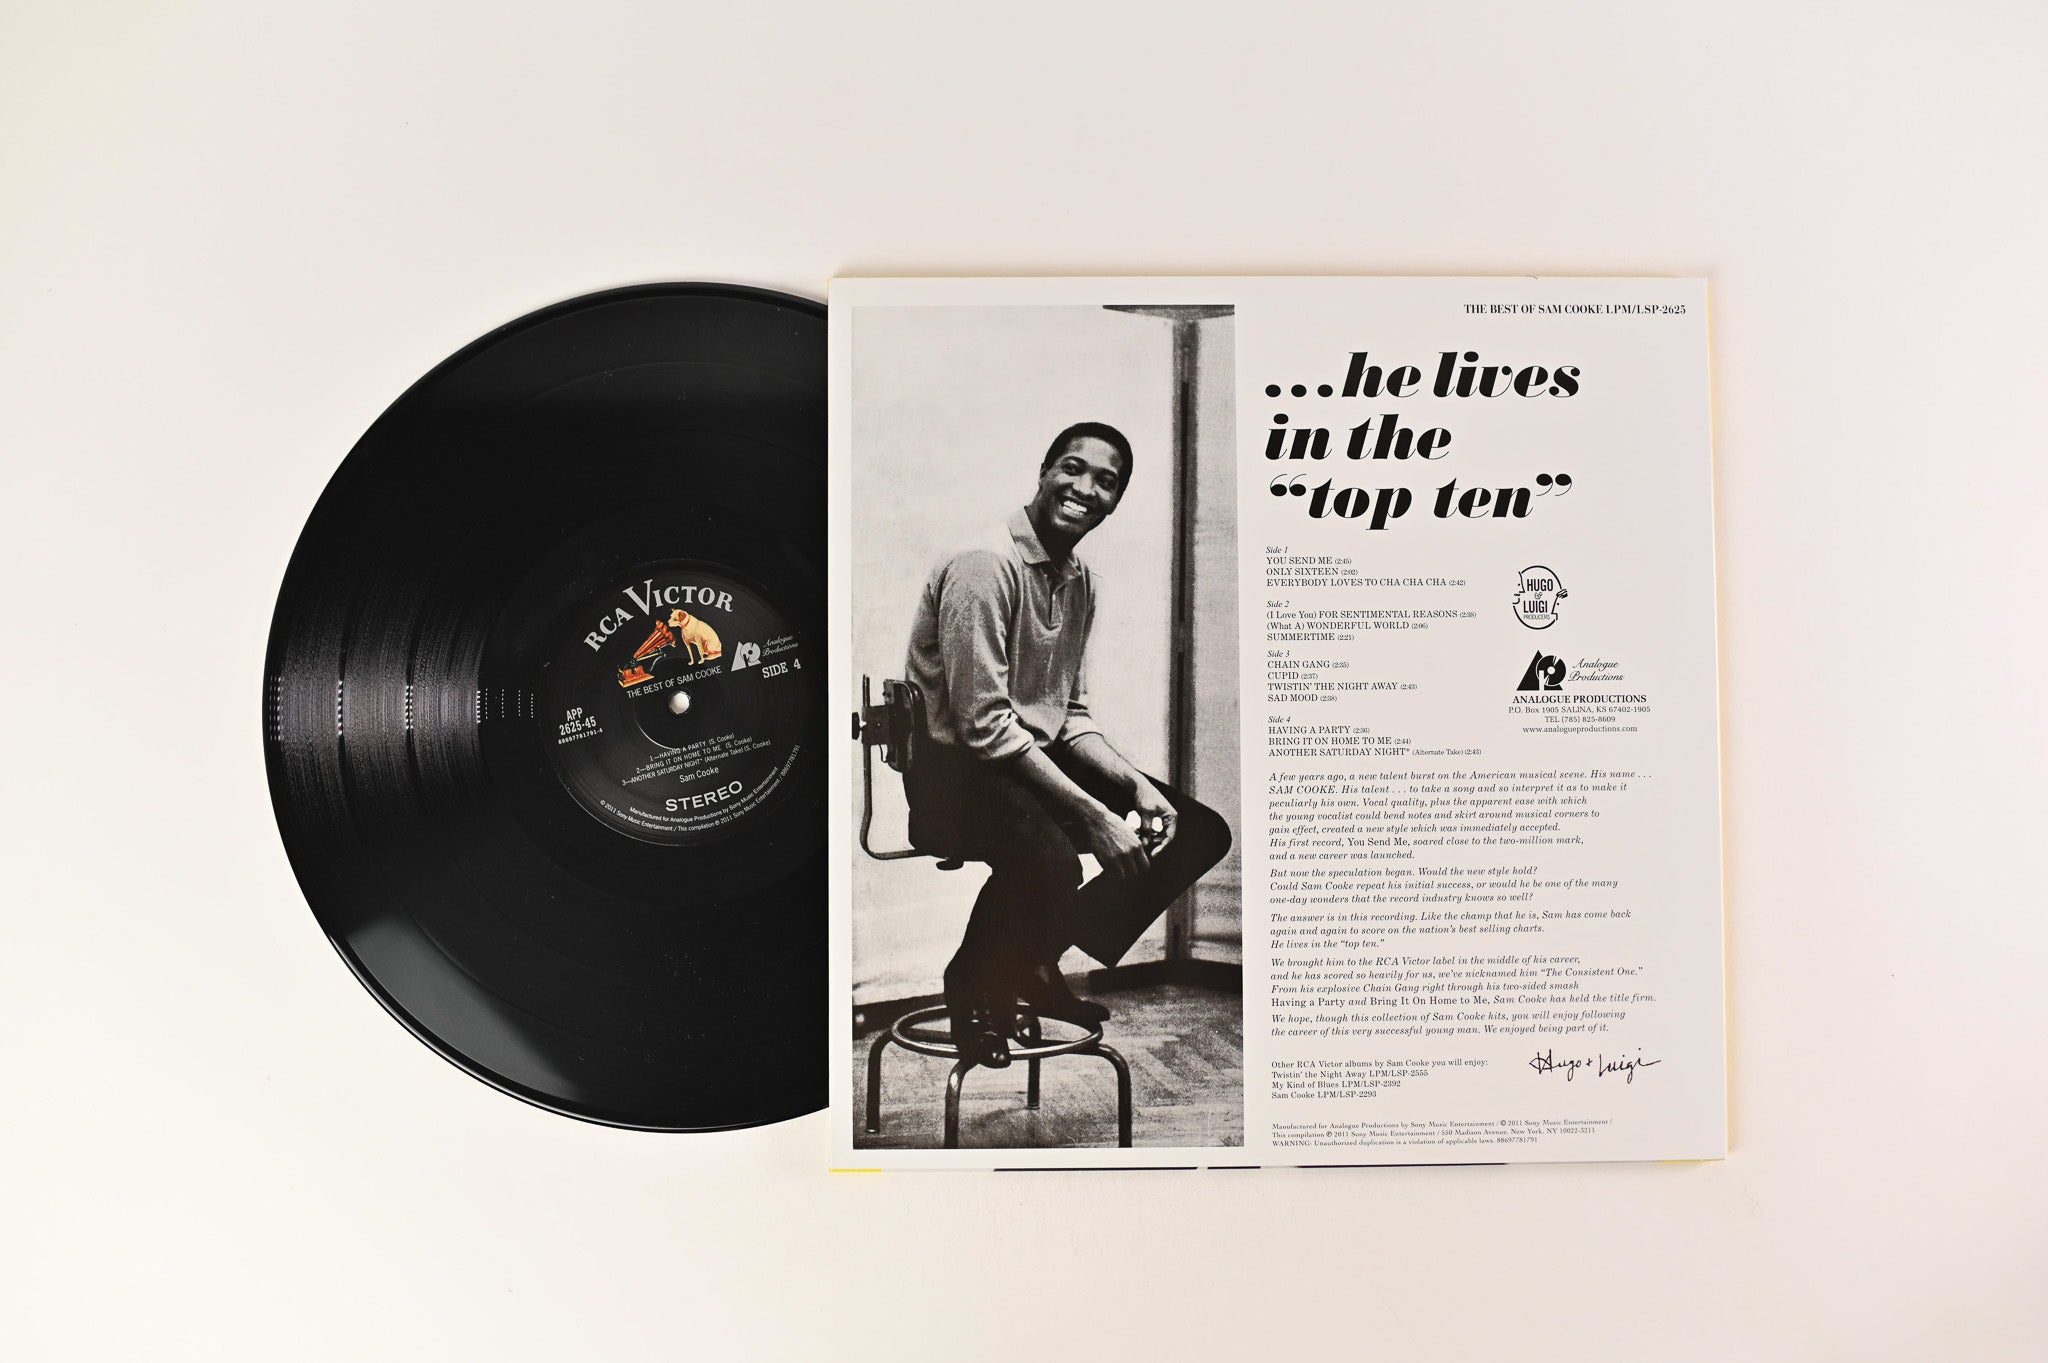 Sam Cooke - The Best Of Sam Cooke on RCA Analogue Productions 45 RPM Reissue